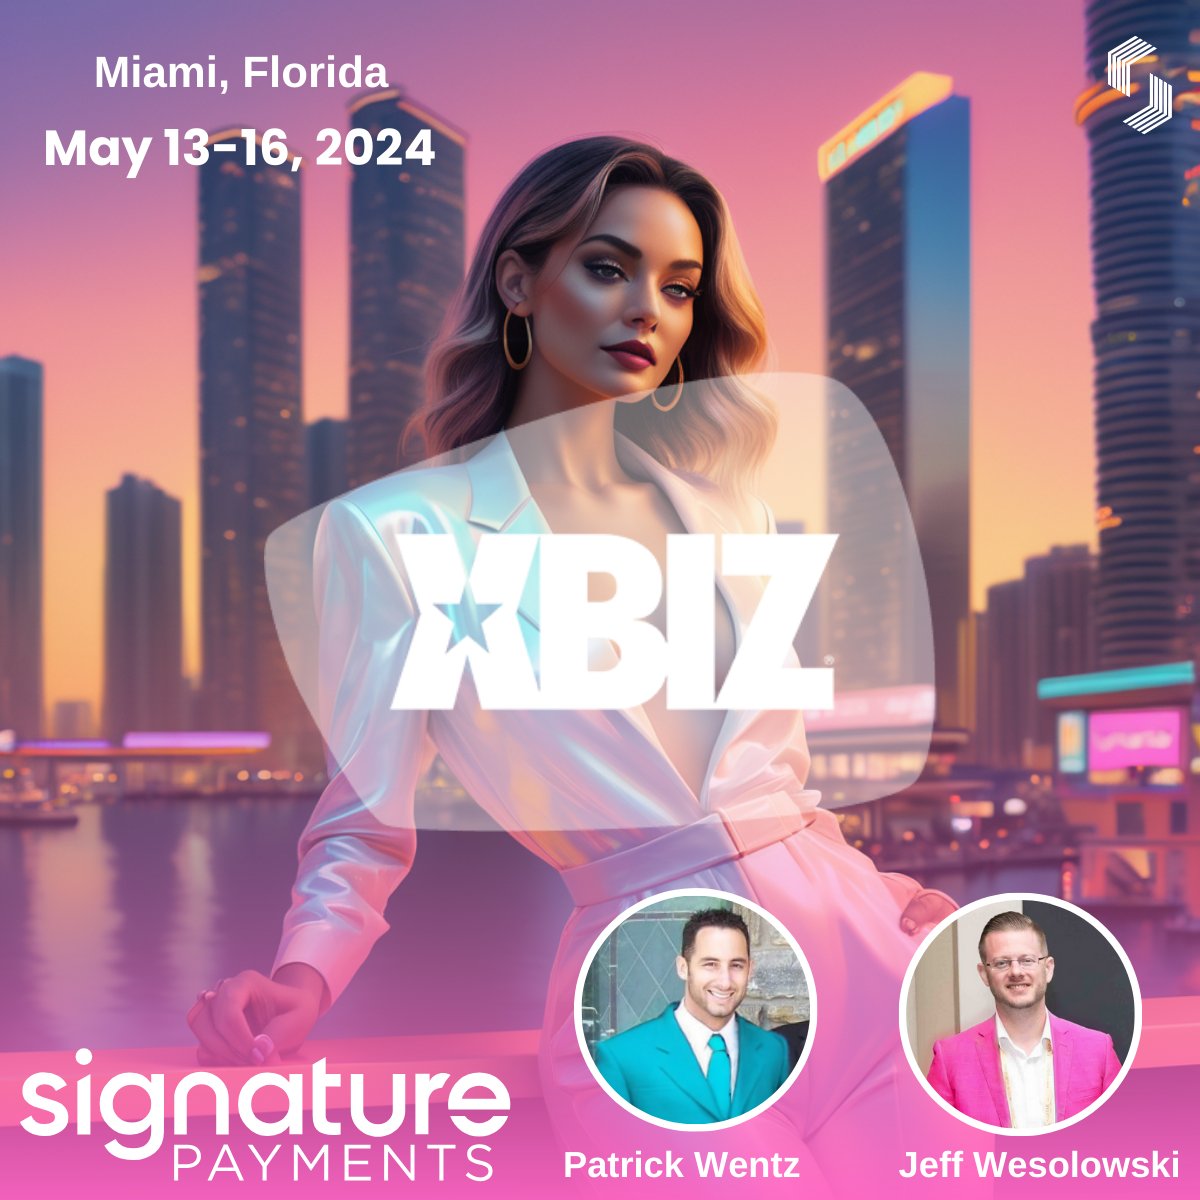 Get ready, Miami! 

XBIZ Miami is just around the corner! 

Our representatives, Jeff Wesolowski, and Patrick Wentz, are excited to showcase how Signature Payments can help adult entertainment businesses succeed. 

#XBIZMiami #SignaturePayments #PaymentSolutions #MiamiBound2024